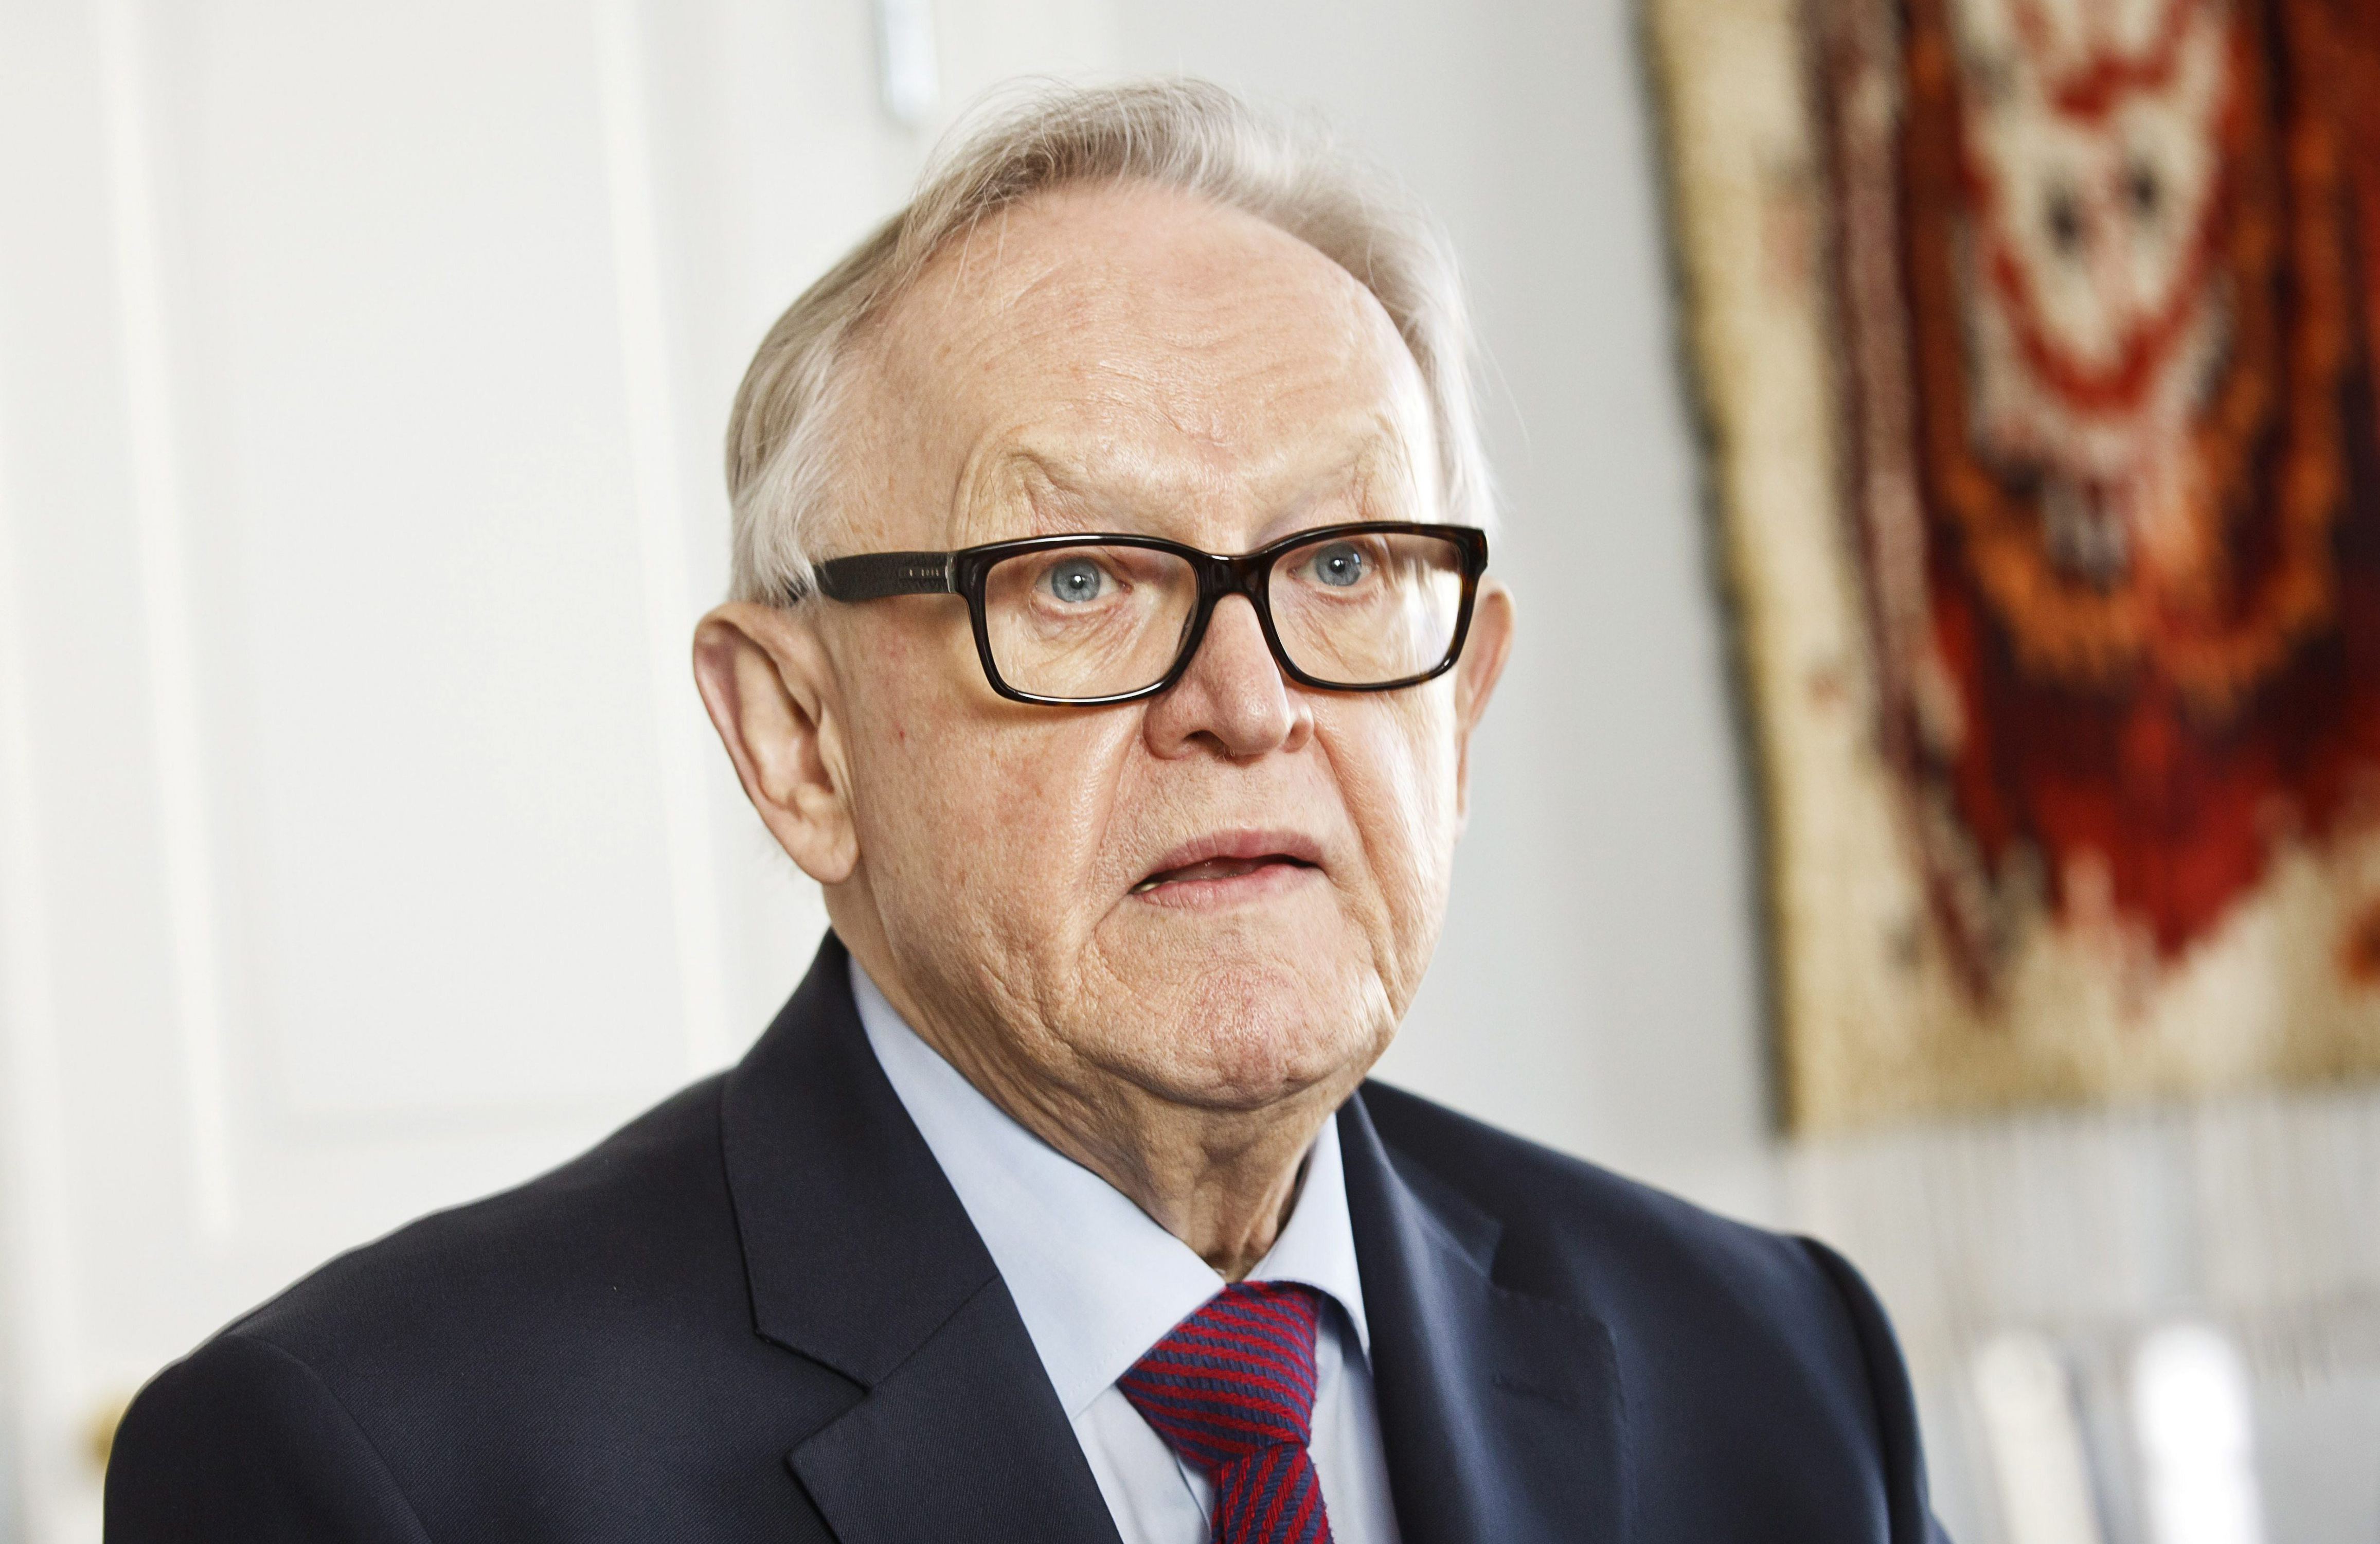 In this file photo dated Feb. 16, 2016, former President of Finland Martti Ahtisaari at luncheon for political journalists in Helsinki, Finland. Ahtisaari, the former Finnish president, UN diplomat and recipient of the 2008 Nobel Peace Prize, has tested positive with the coronavirus. 